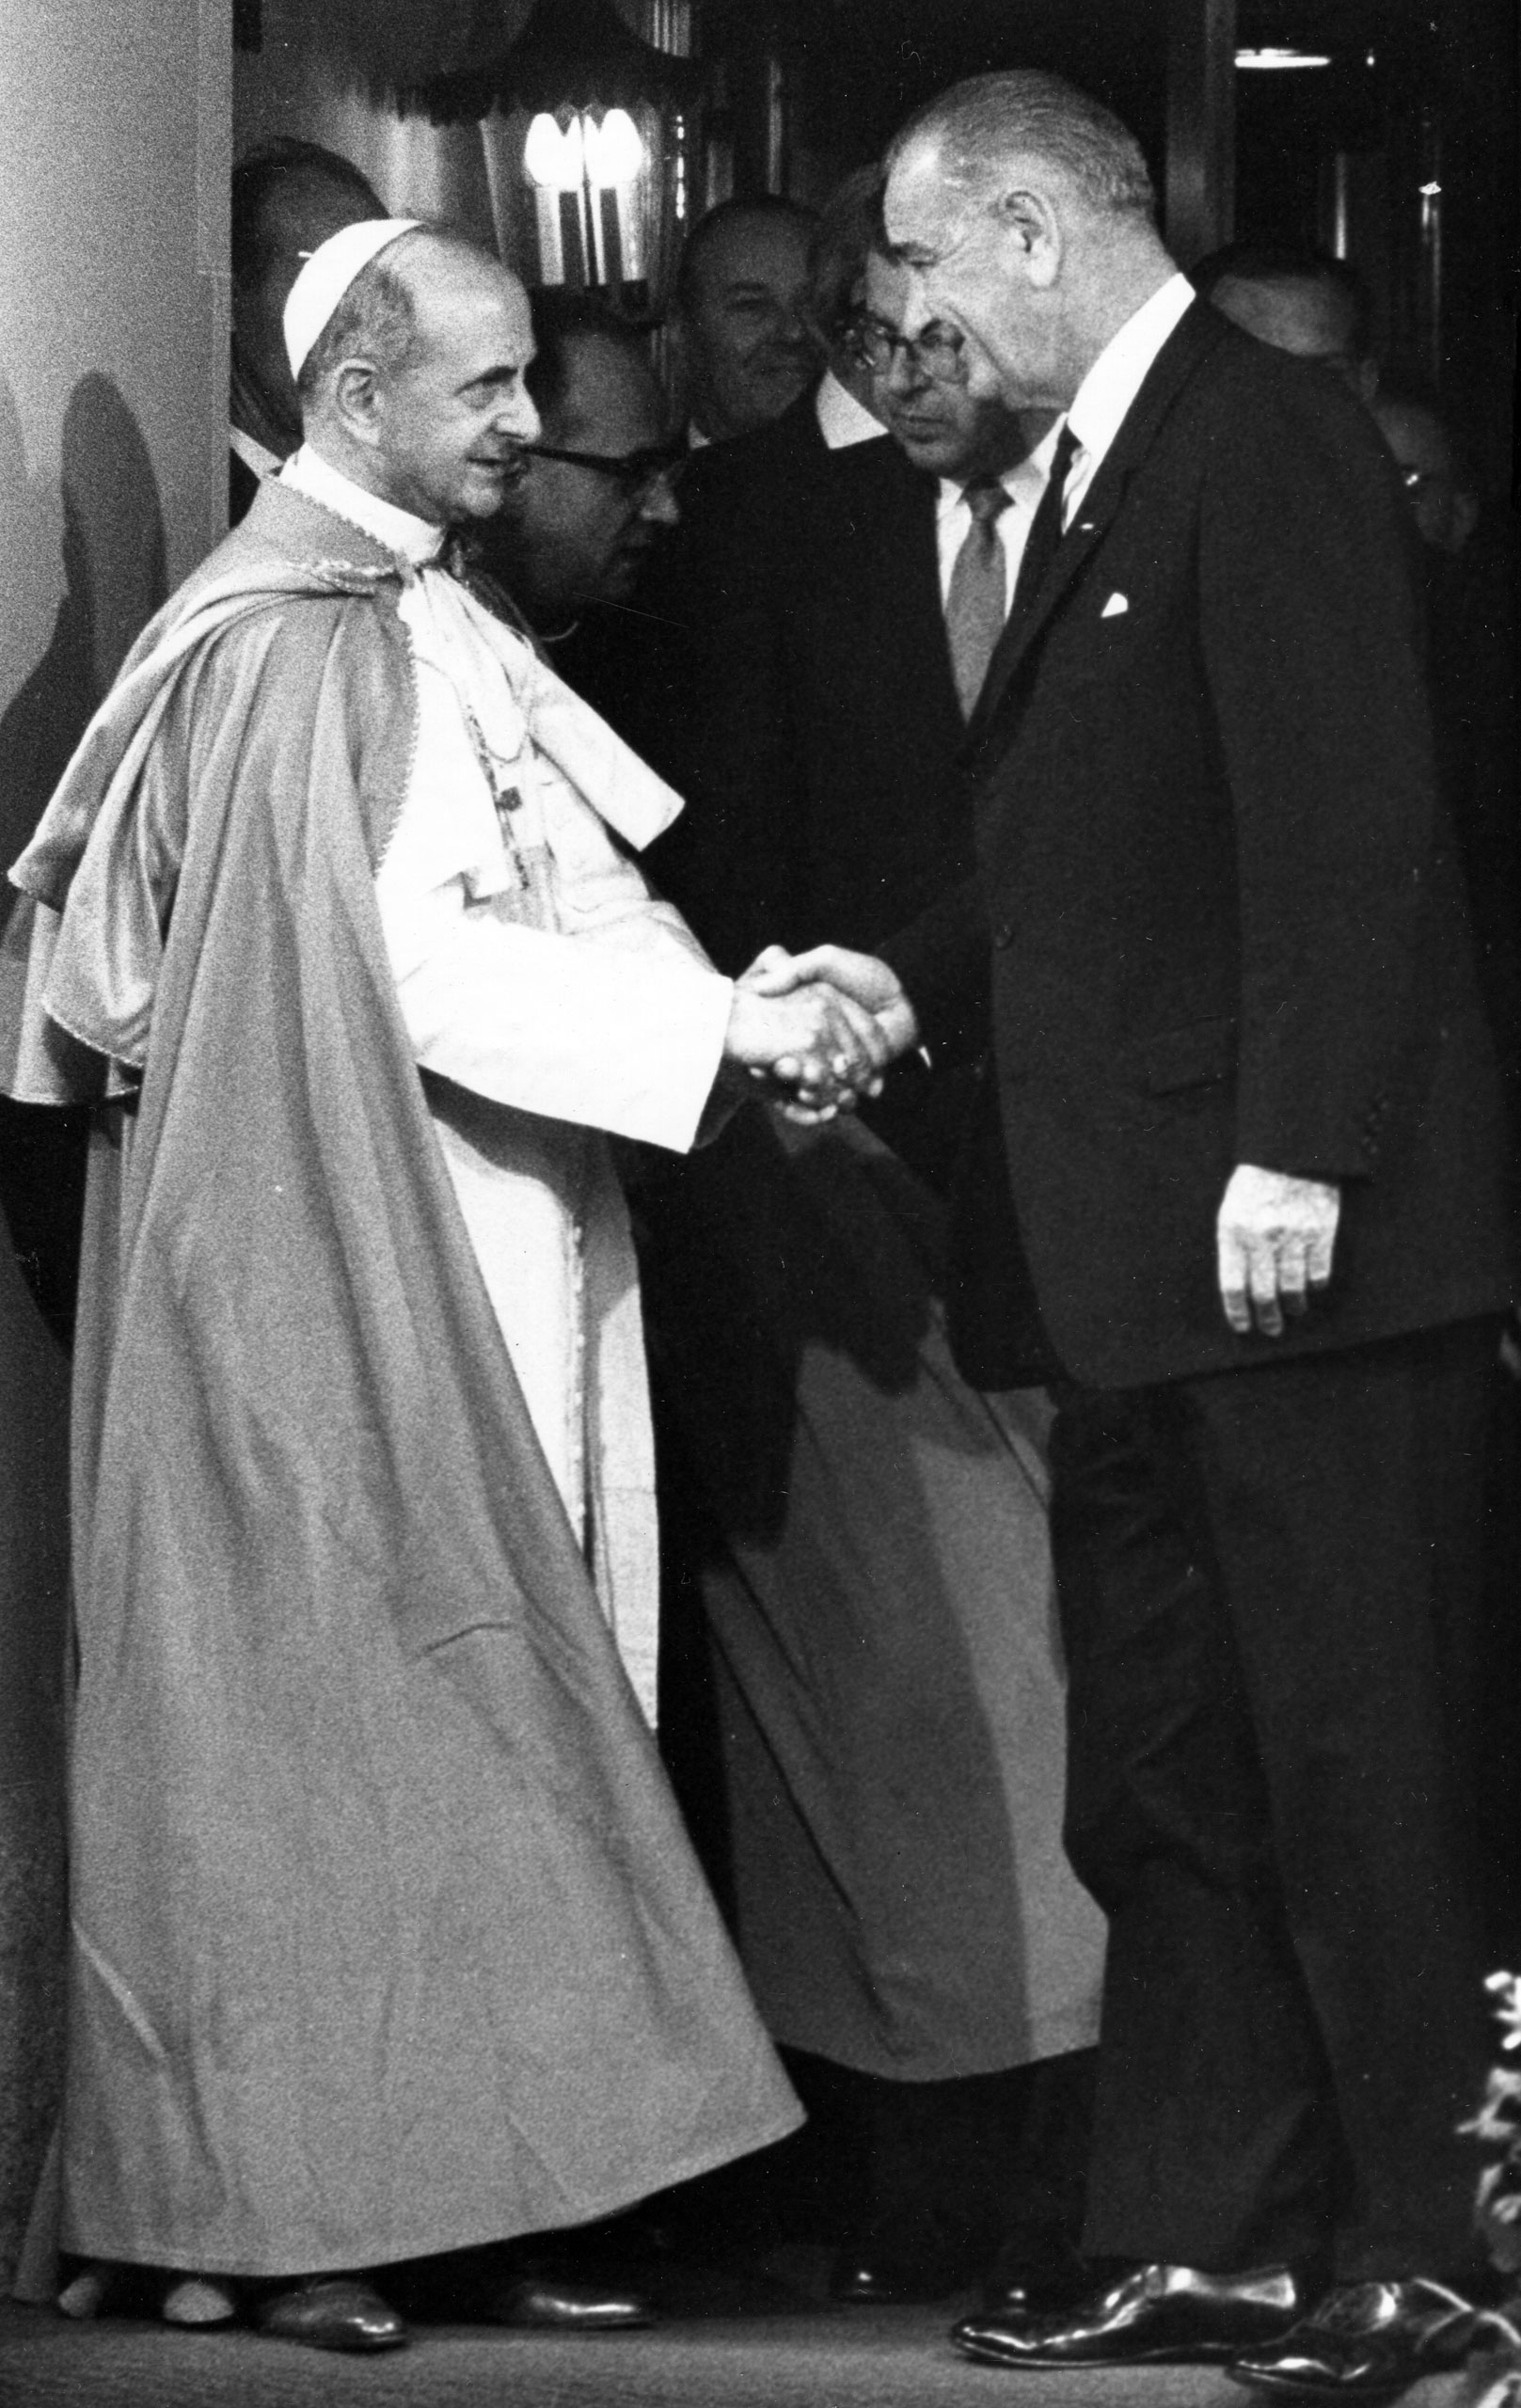 President Lyndon Johnson and Pope Paul VI, the first Roman Catholic Pontiff to journey to the Western hemisphere, bid farewell to each other following their hour-long conference at the Waldorf-Astoria, New York, New York, October 4, 1965. The Pope was in New York to address the United Nations.